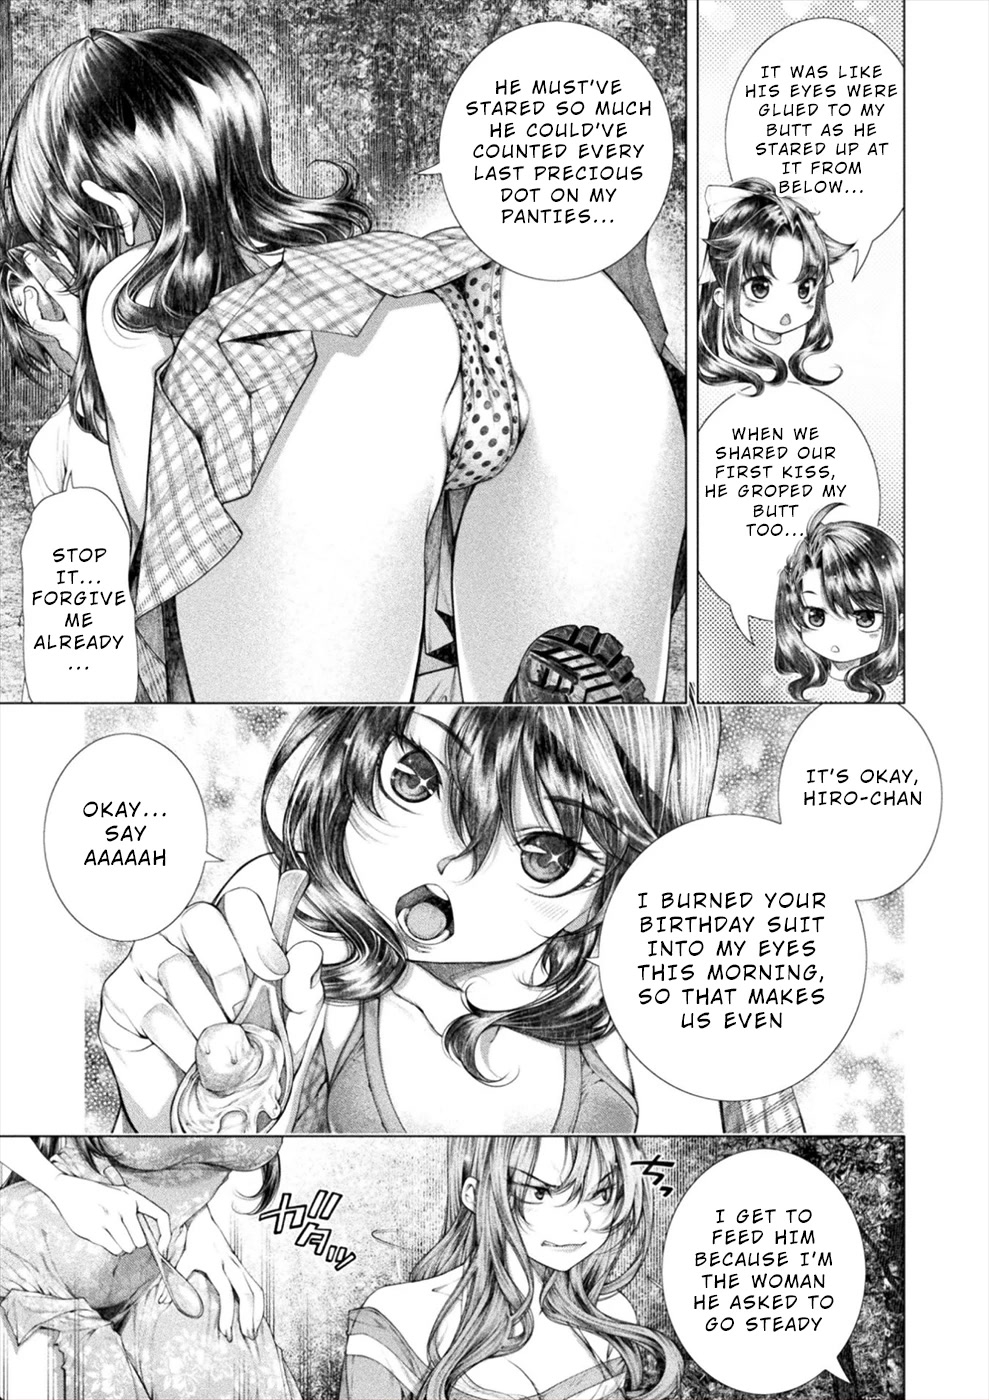 Lovetrap Island - Passion In Distant Lands - Chapter 17 #15